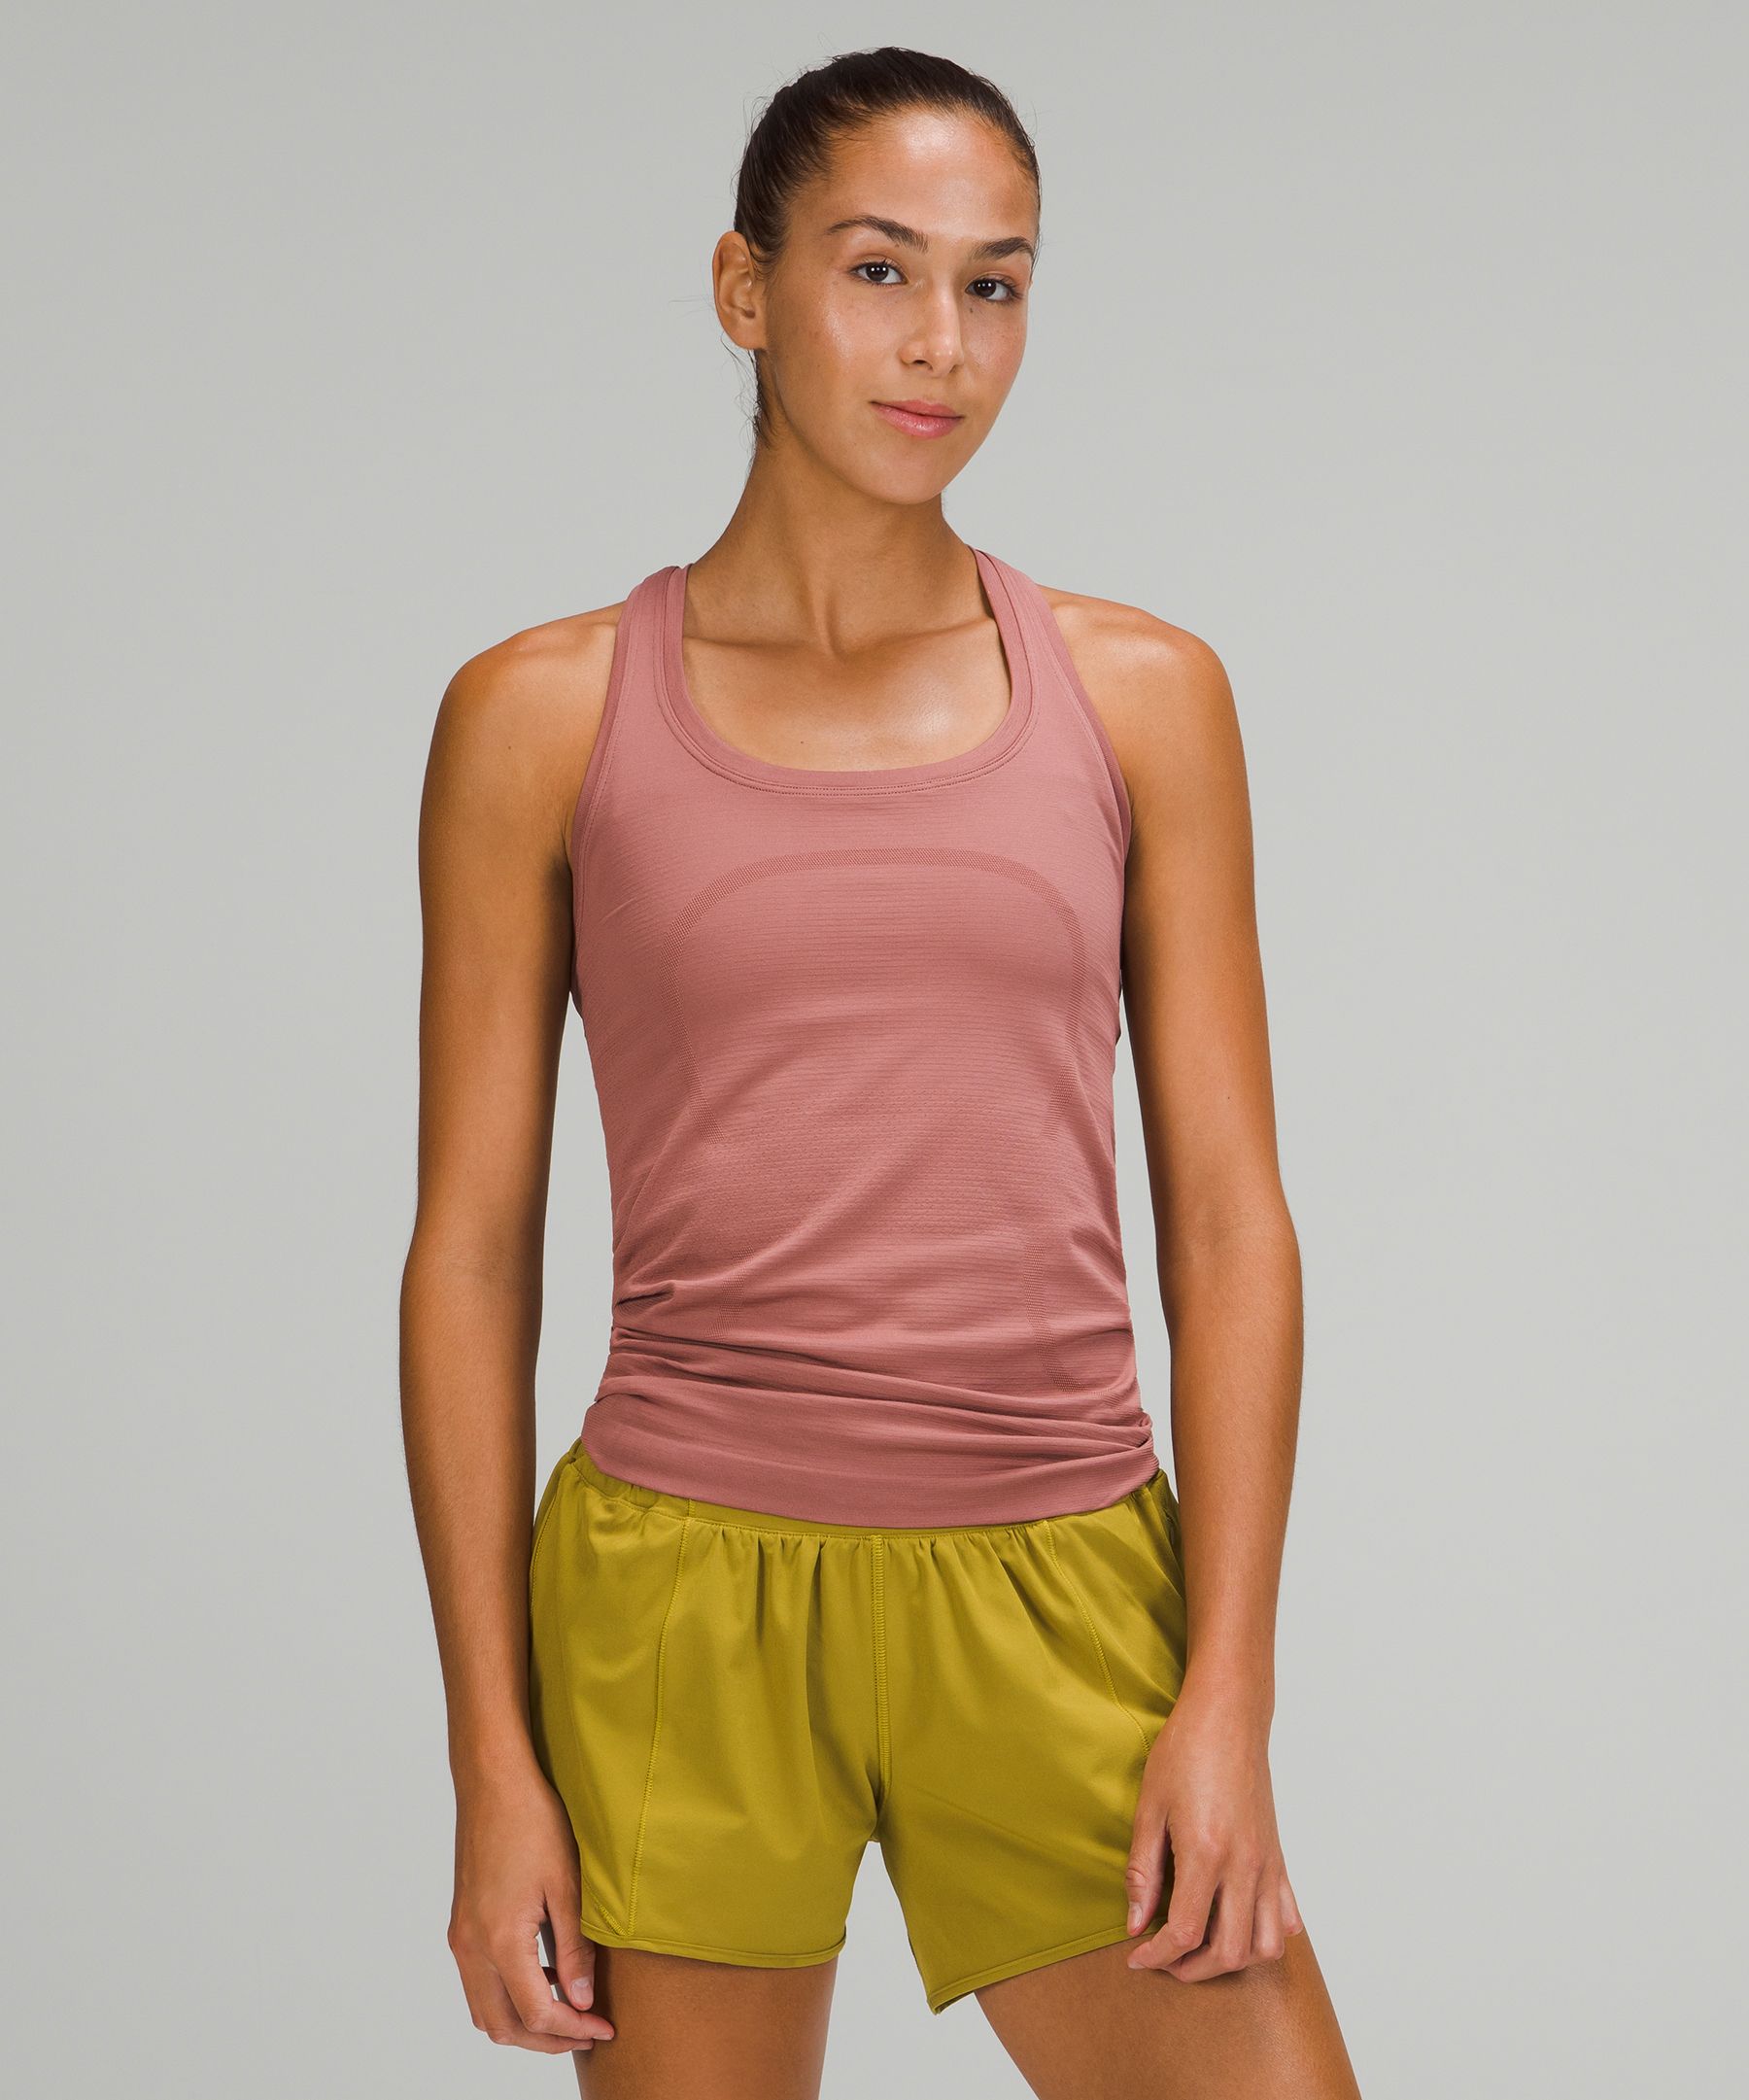 Lululemon Swiftly Tech Racerback Tank Top 2.0 In Spiced Chai/spiced Chai